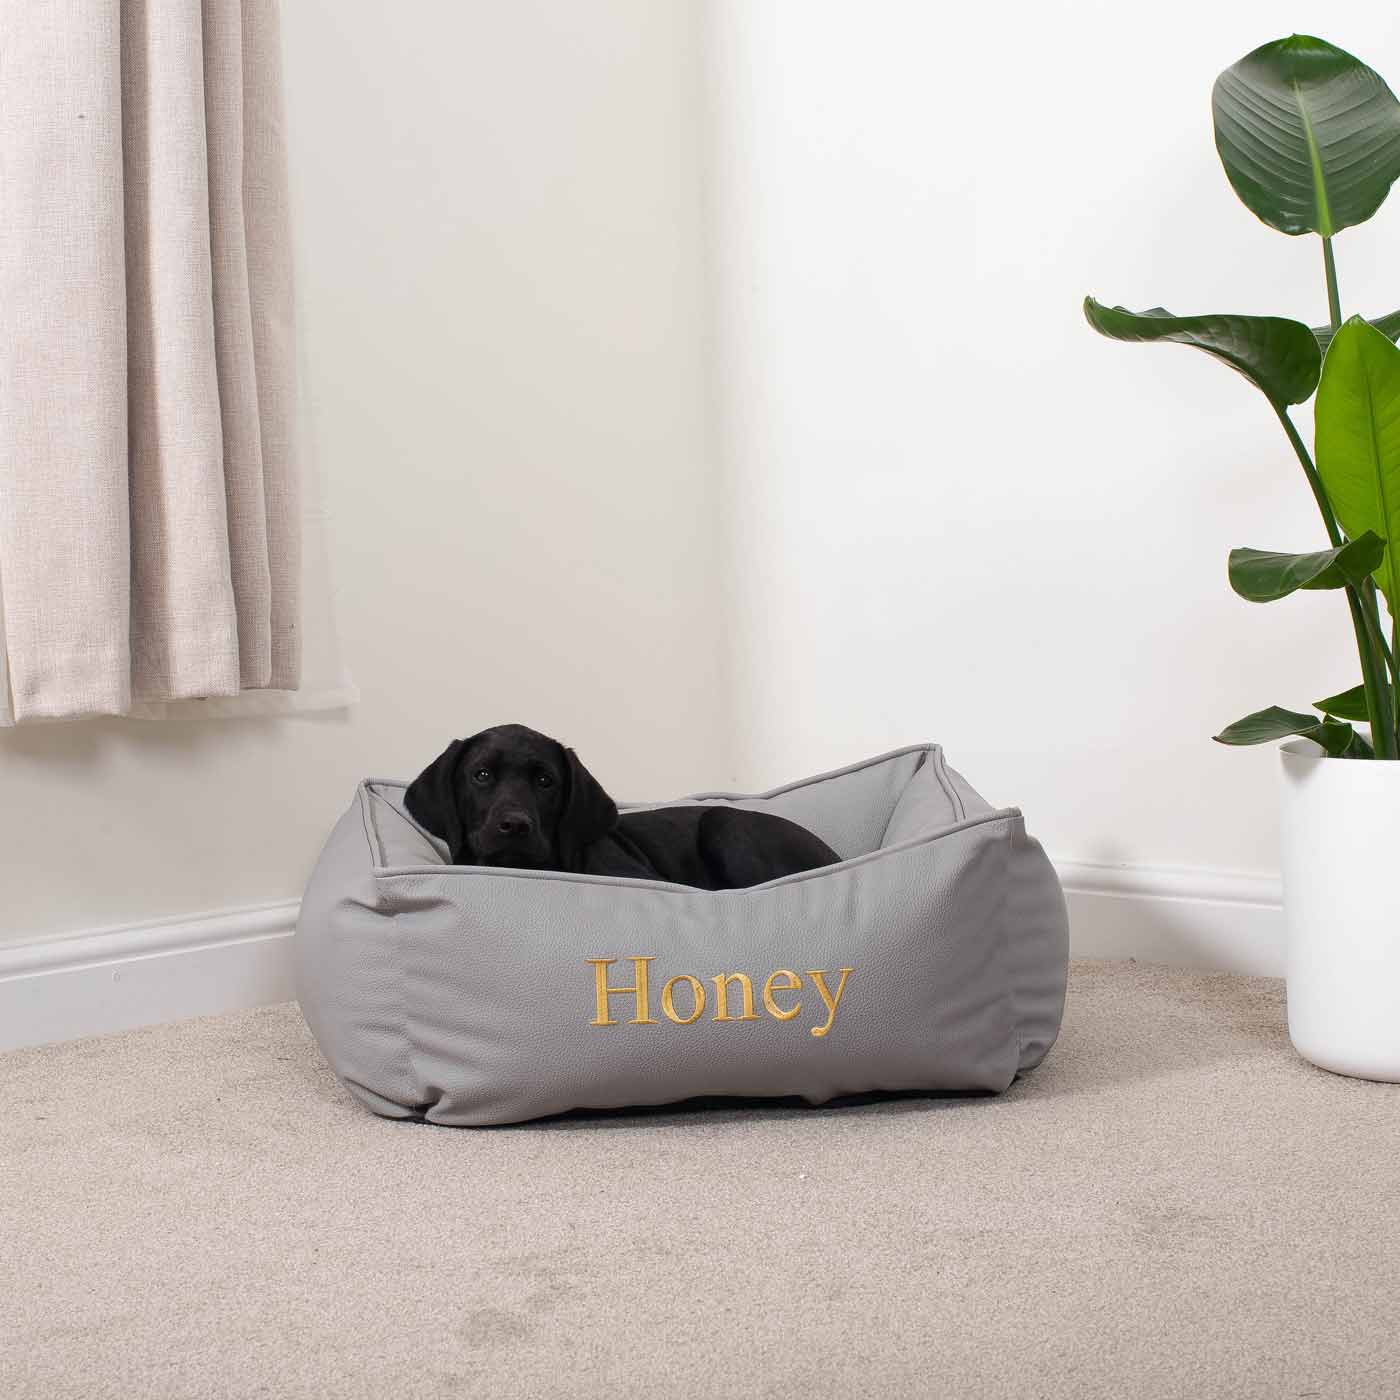 Luxury Handmade Box Bed in Rhino Tough Faux Leather, in Granite, Perfect For Your Pets Nap Time! Available To Personalise at Lords & Labradors